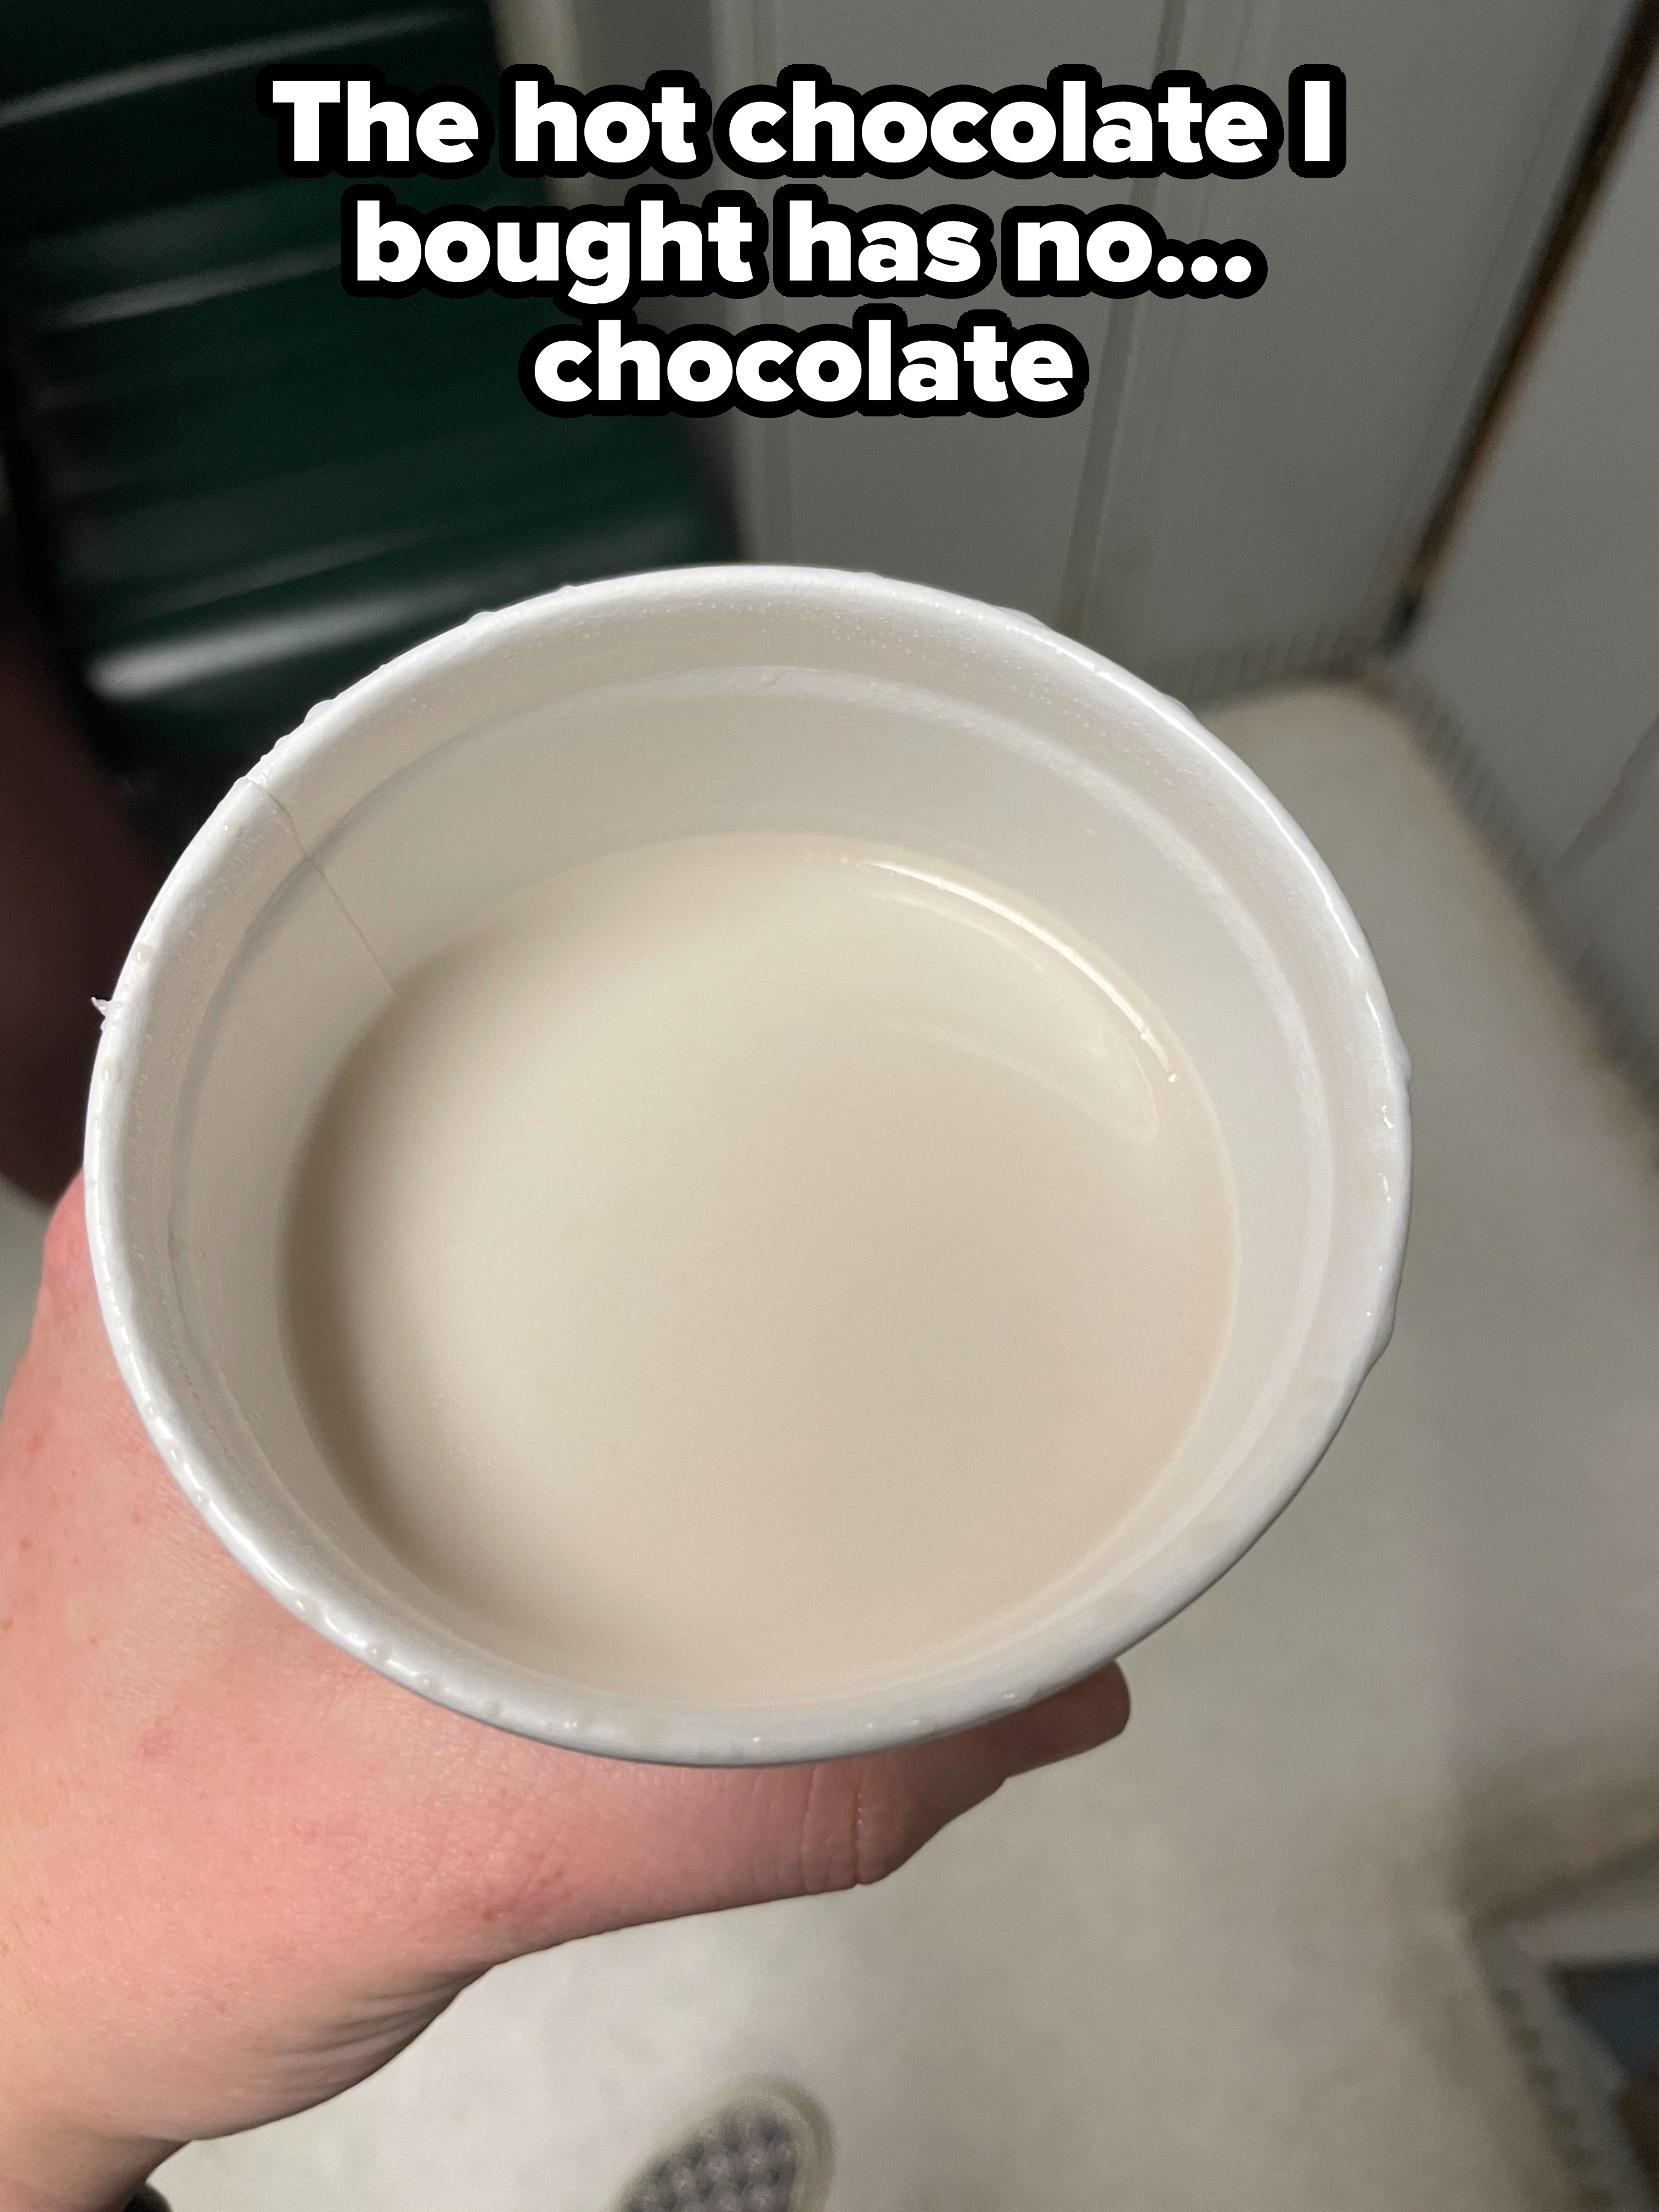 Person holding a styrofoam cup filled with a white liquid, possibly milk, indoors